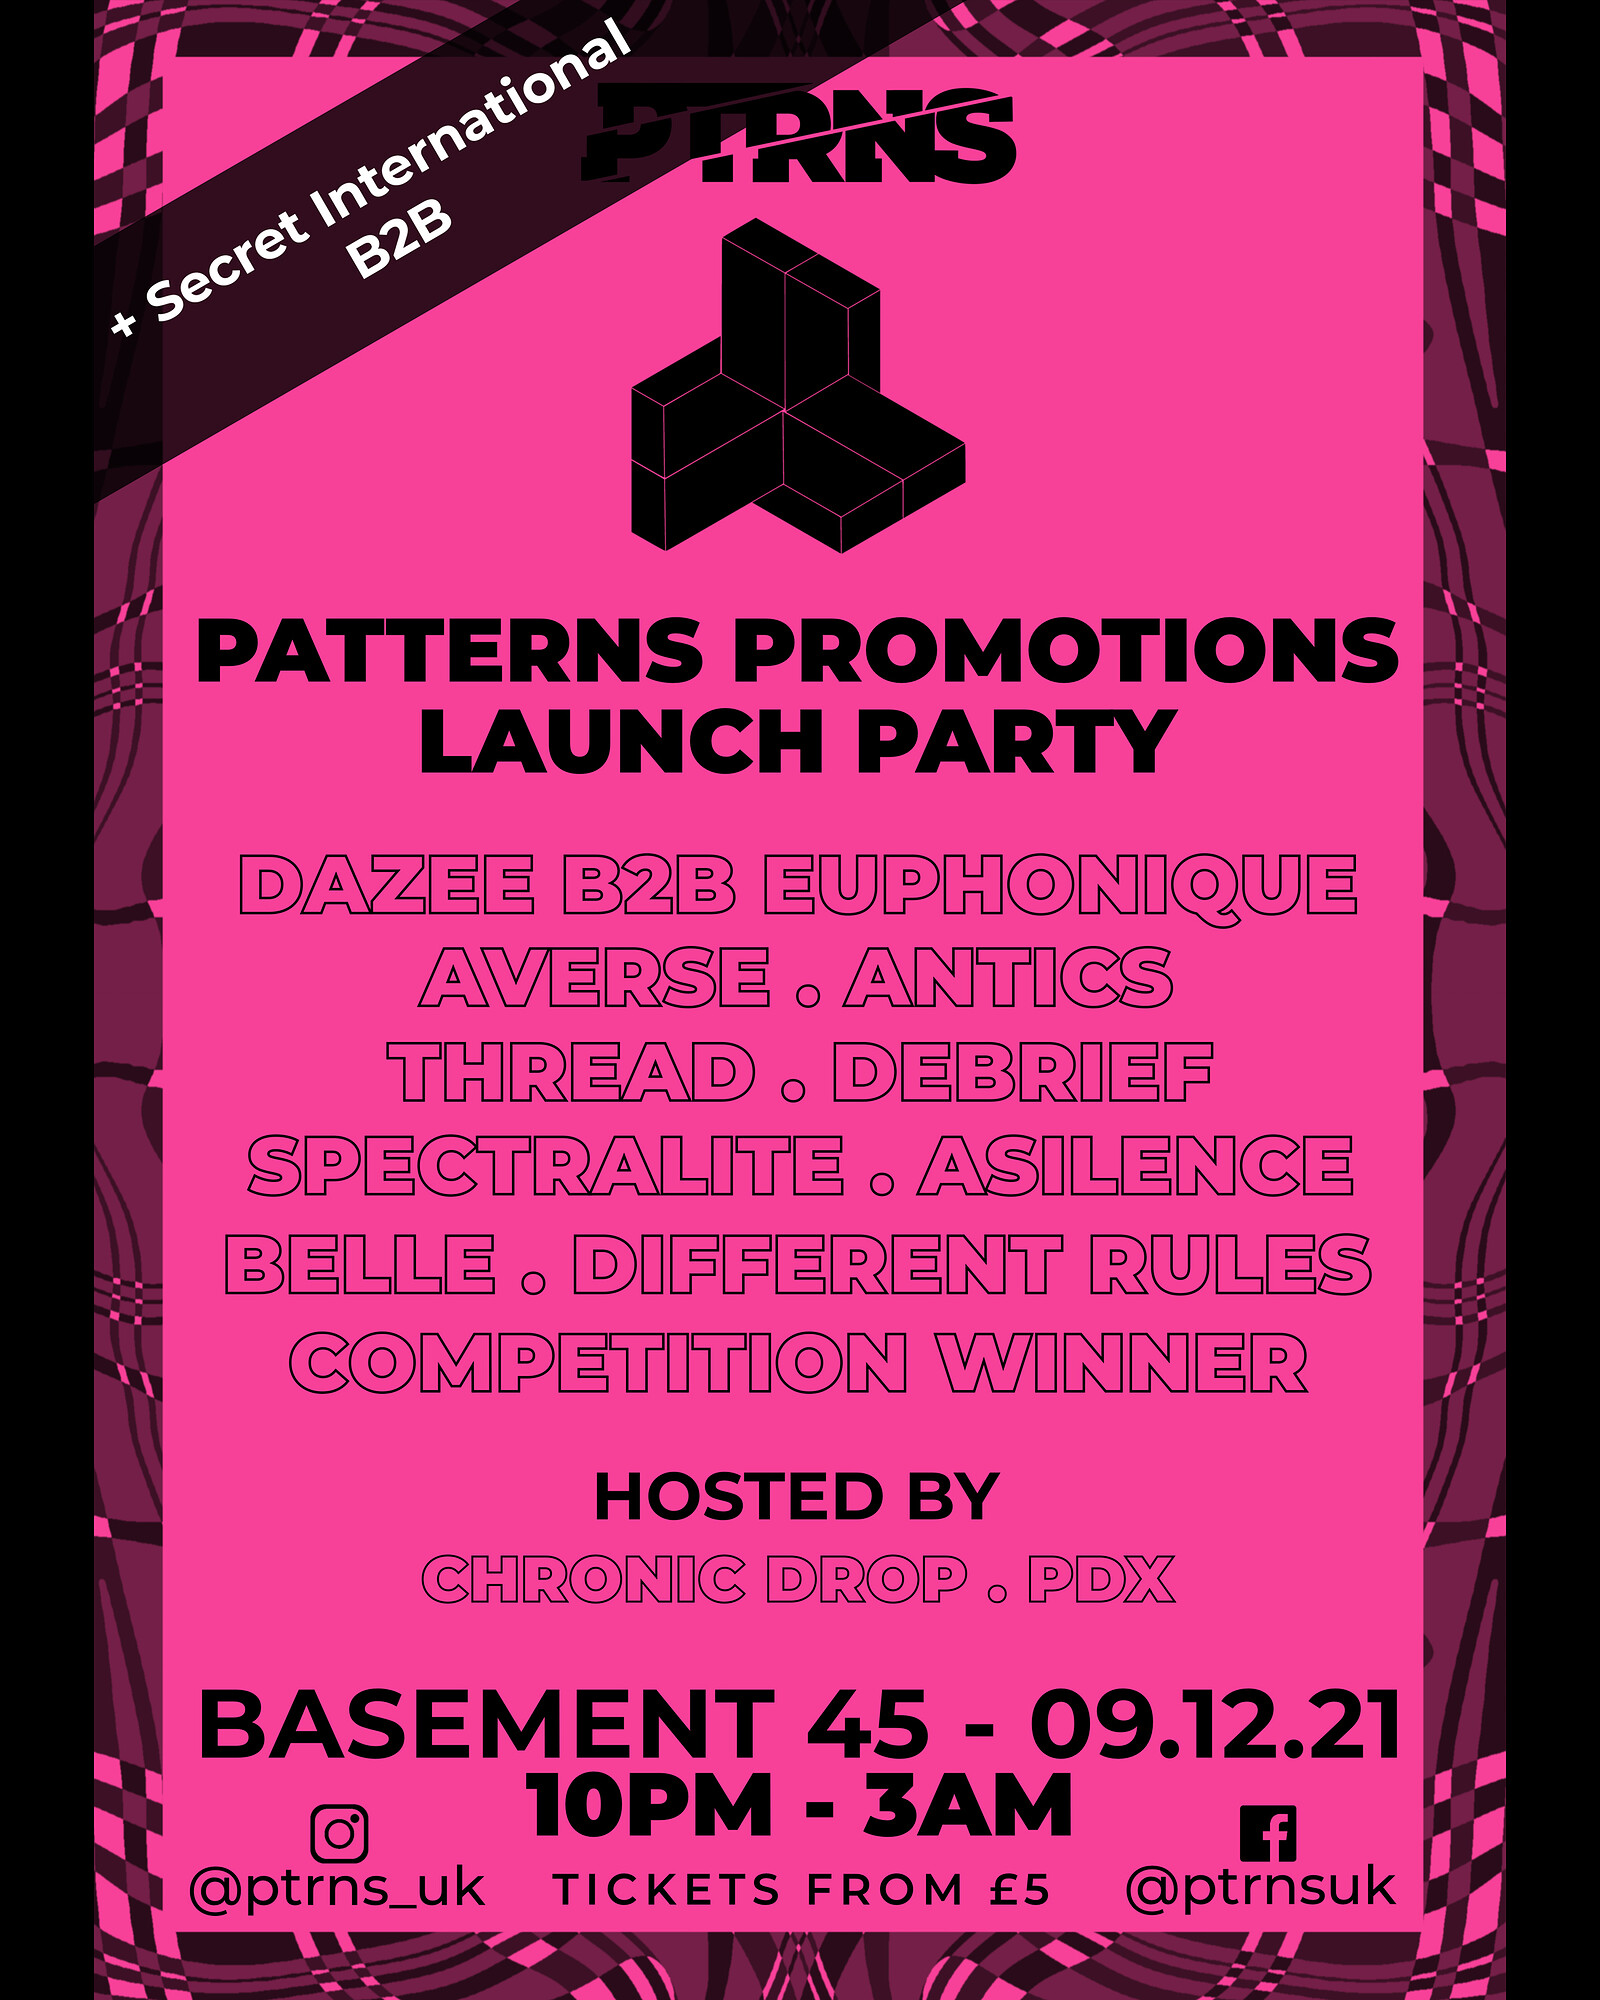 Patterns Promotions Launch Party at Basement 45